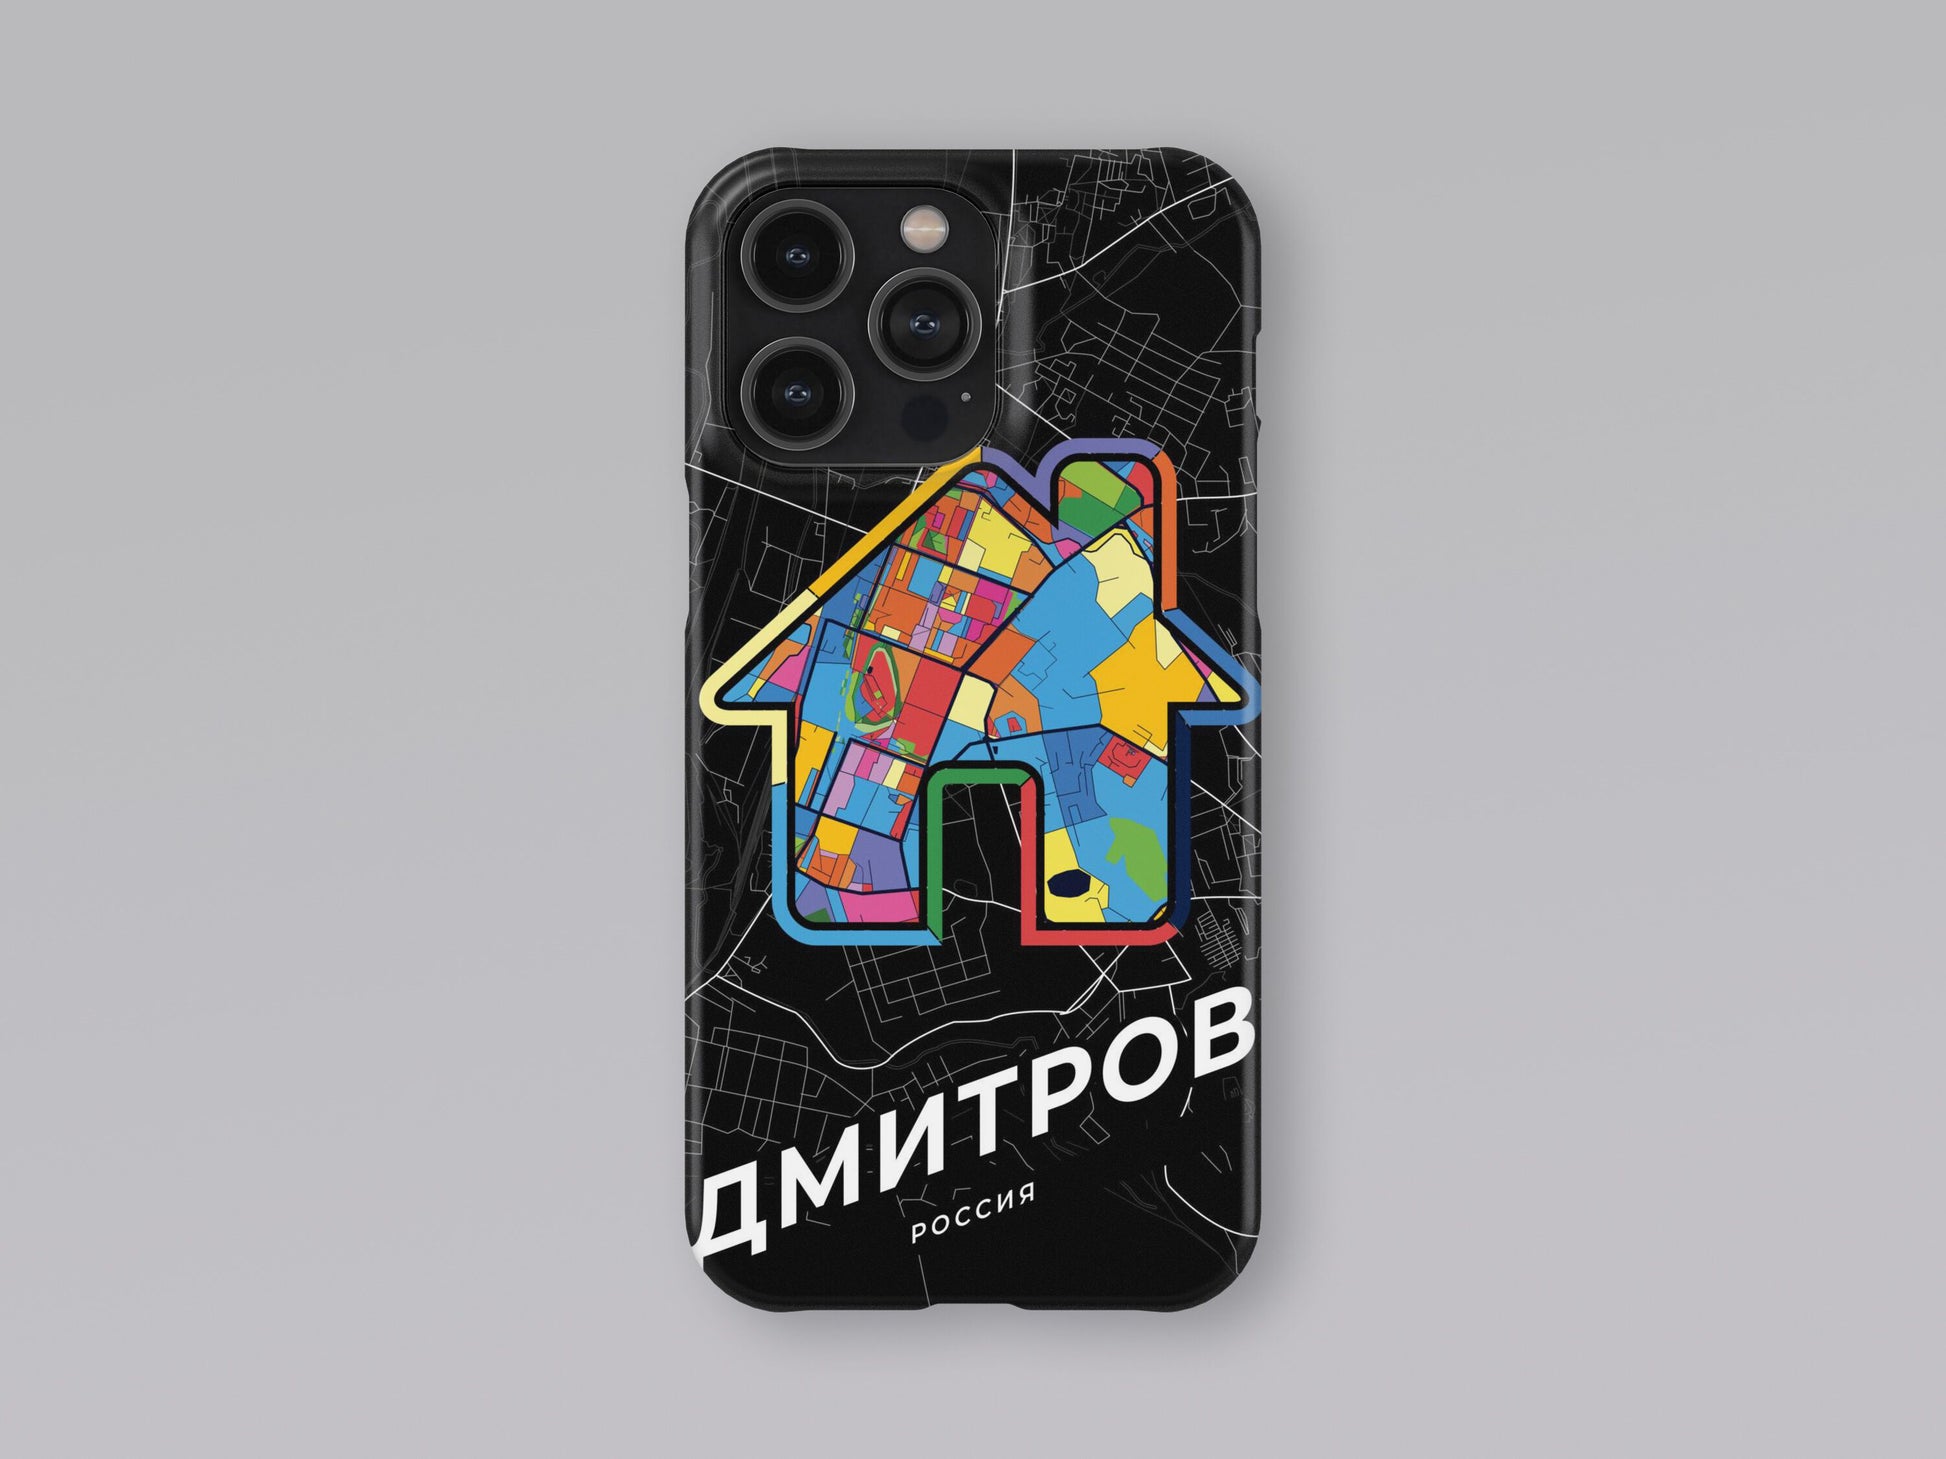 Dmitrov Russia slim phone case with colorful icon. Birthday, wedding or housewarming gift. Couple match cases. 3